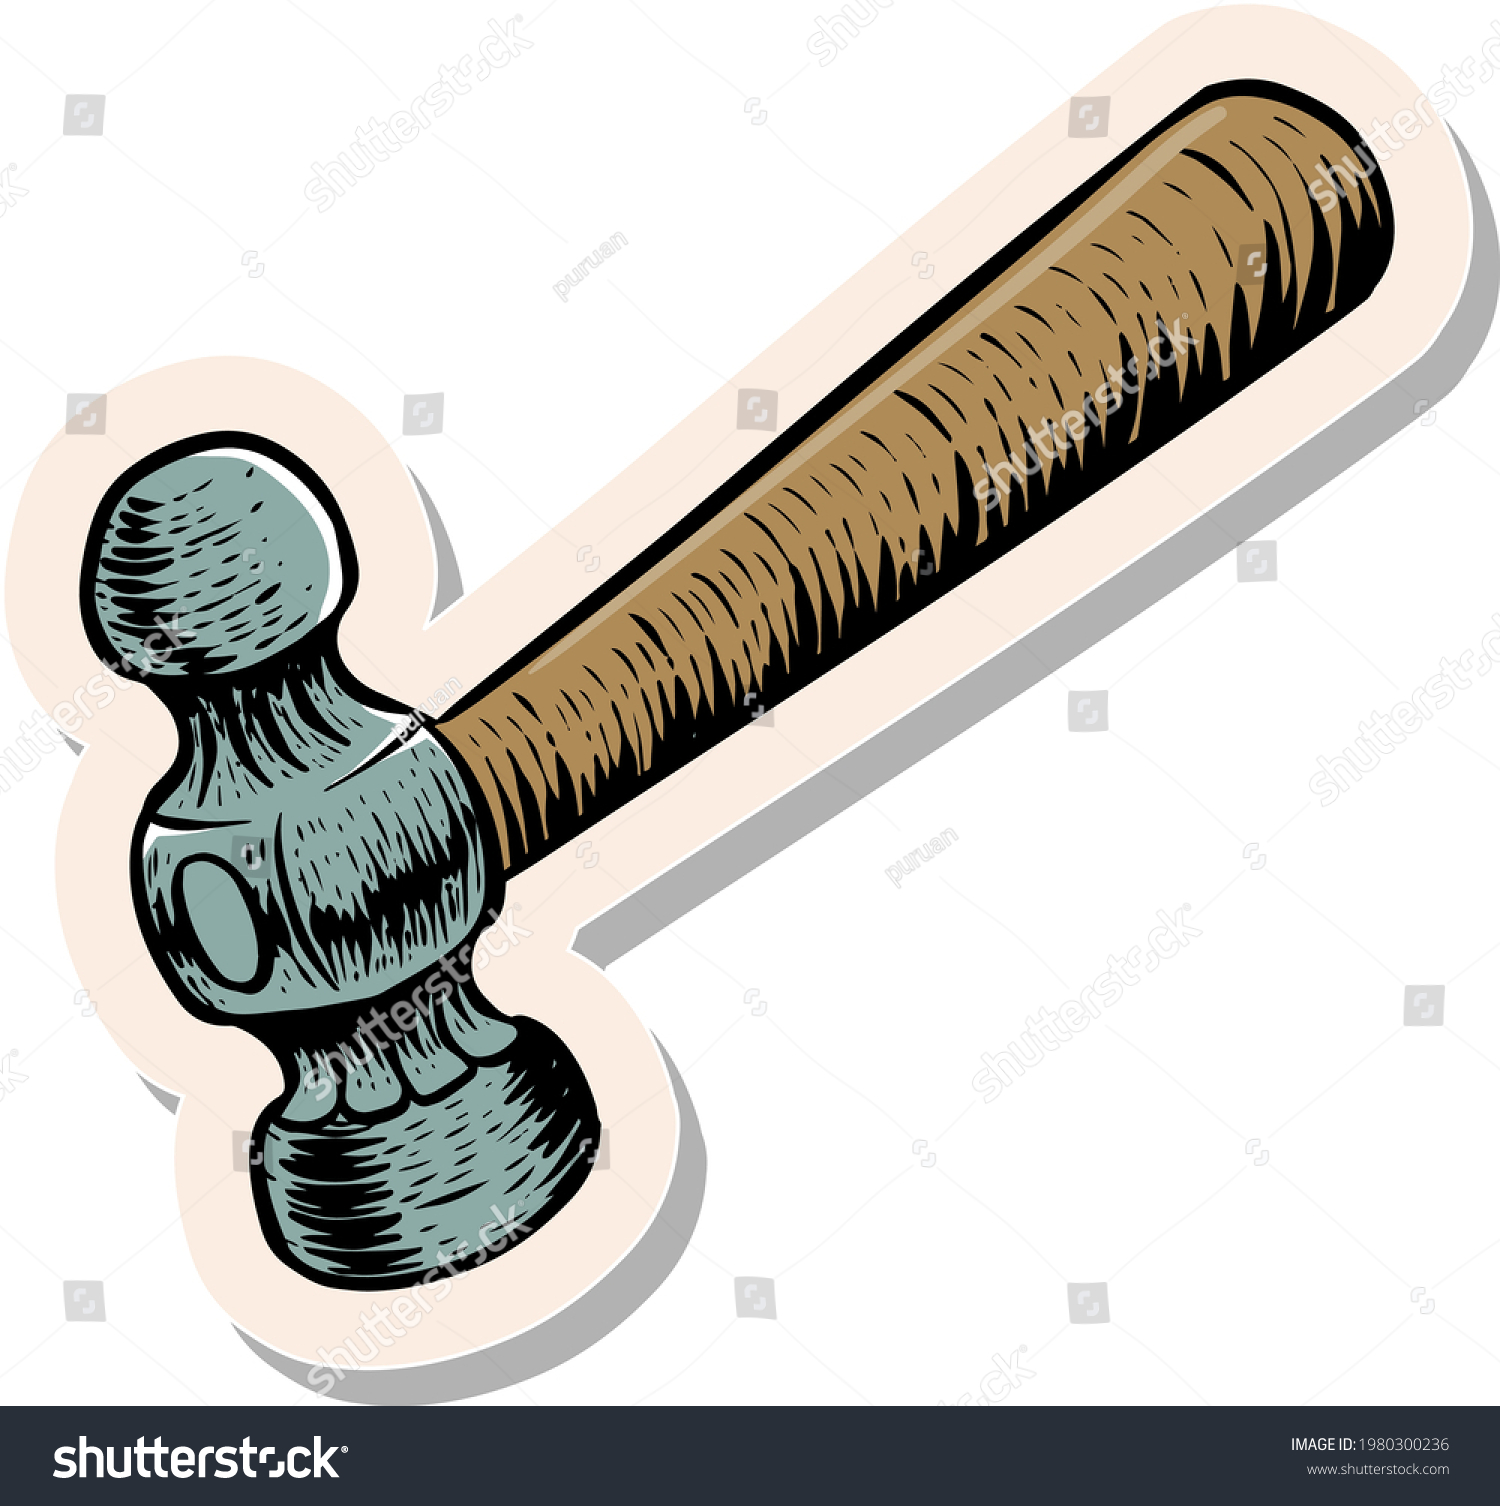 SVG of Hand drawn ball-peen hammer in woodcut woodworking tool in sticker style vector illustration svg